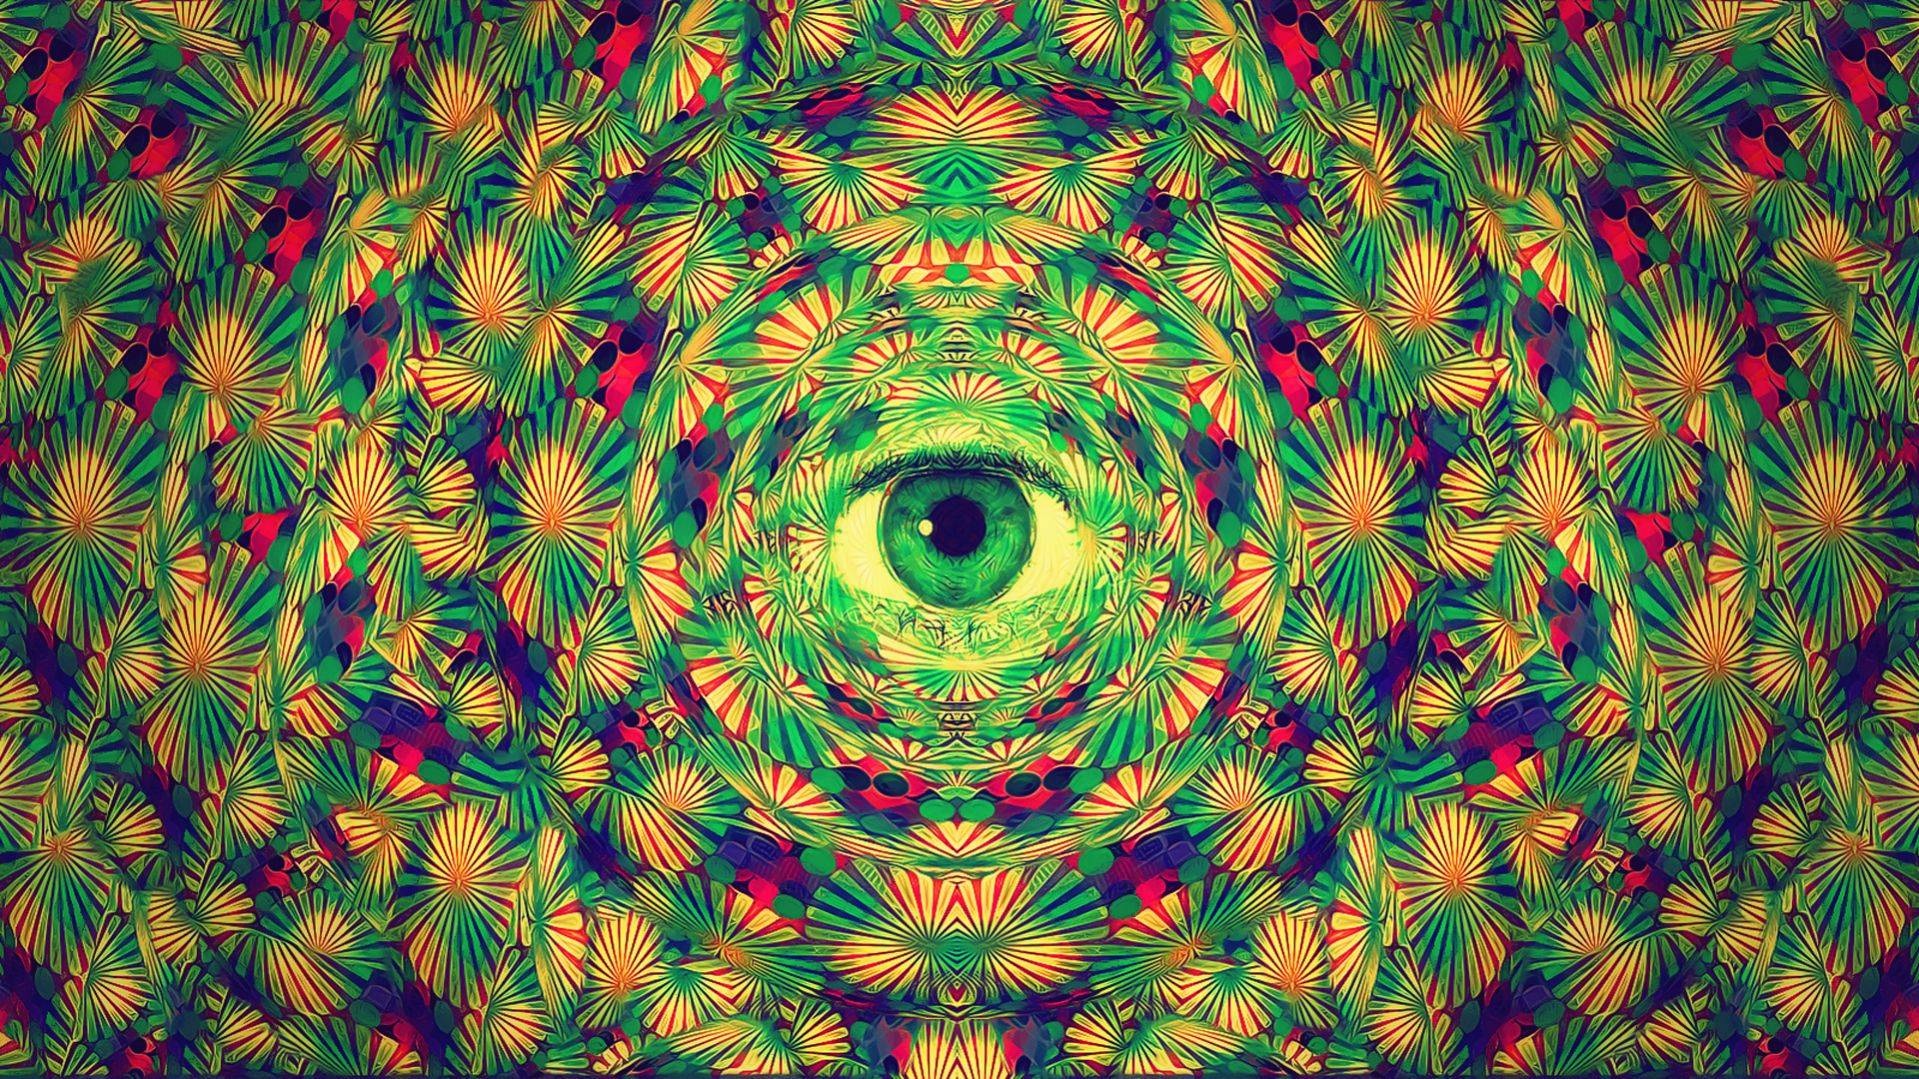 Trippy Wallpapers, Pictures, Images